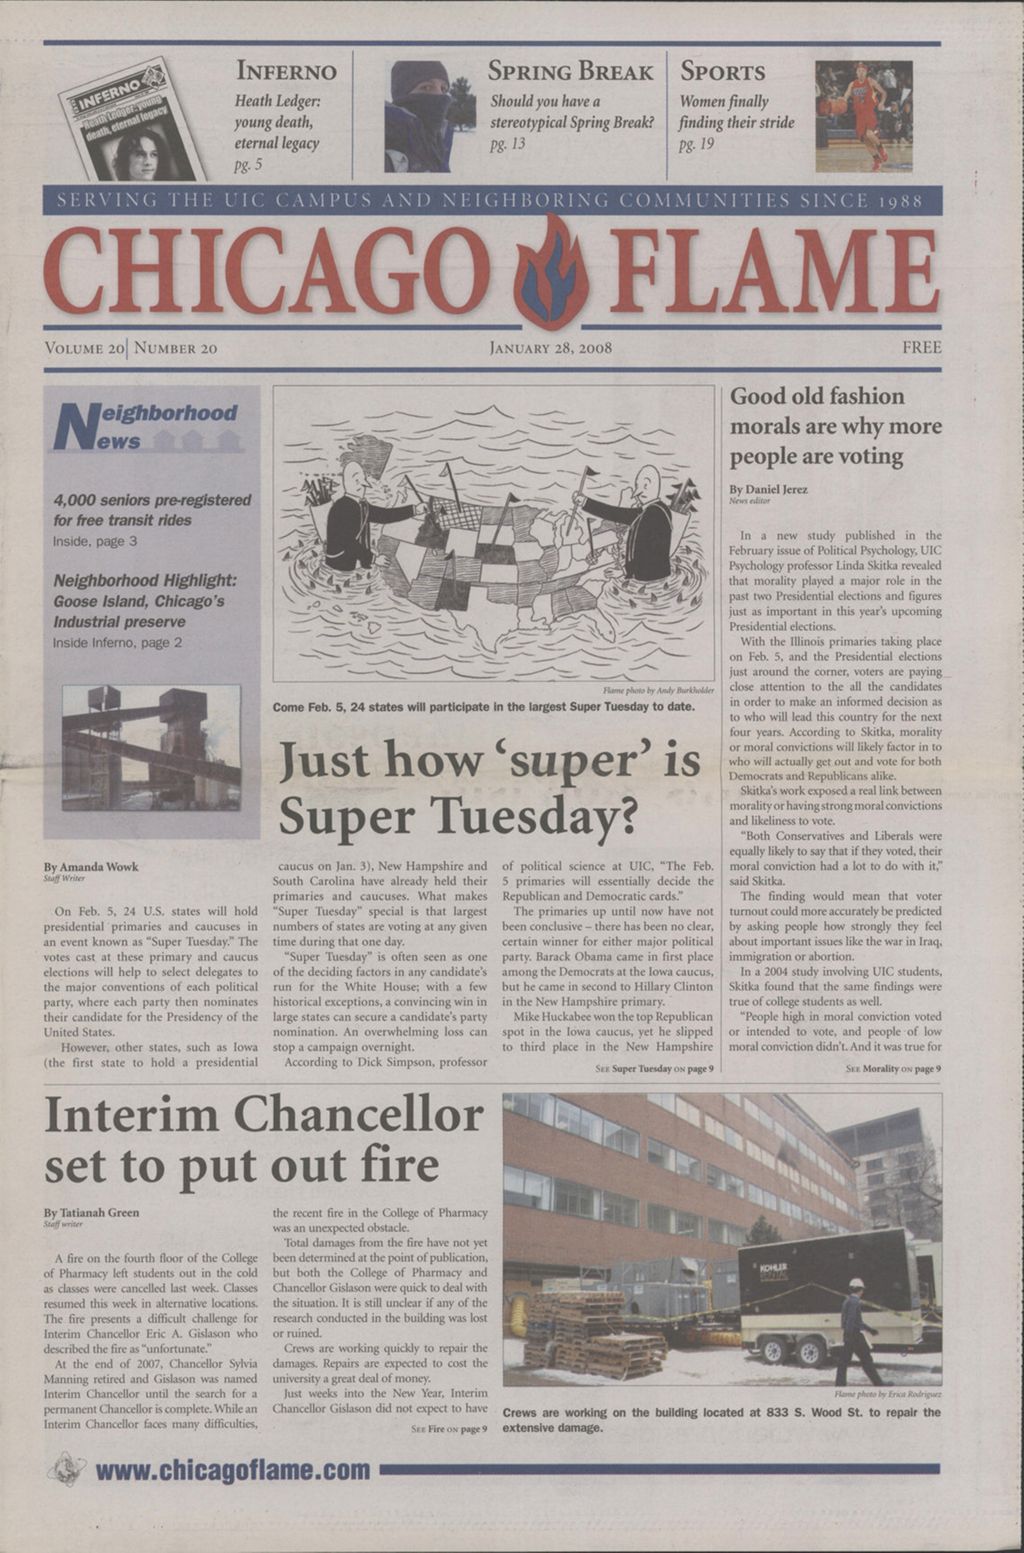 Miniature of Chicago Flame (January 28, 2008)